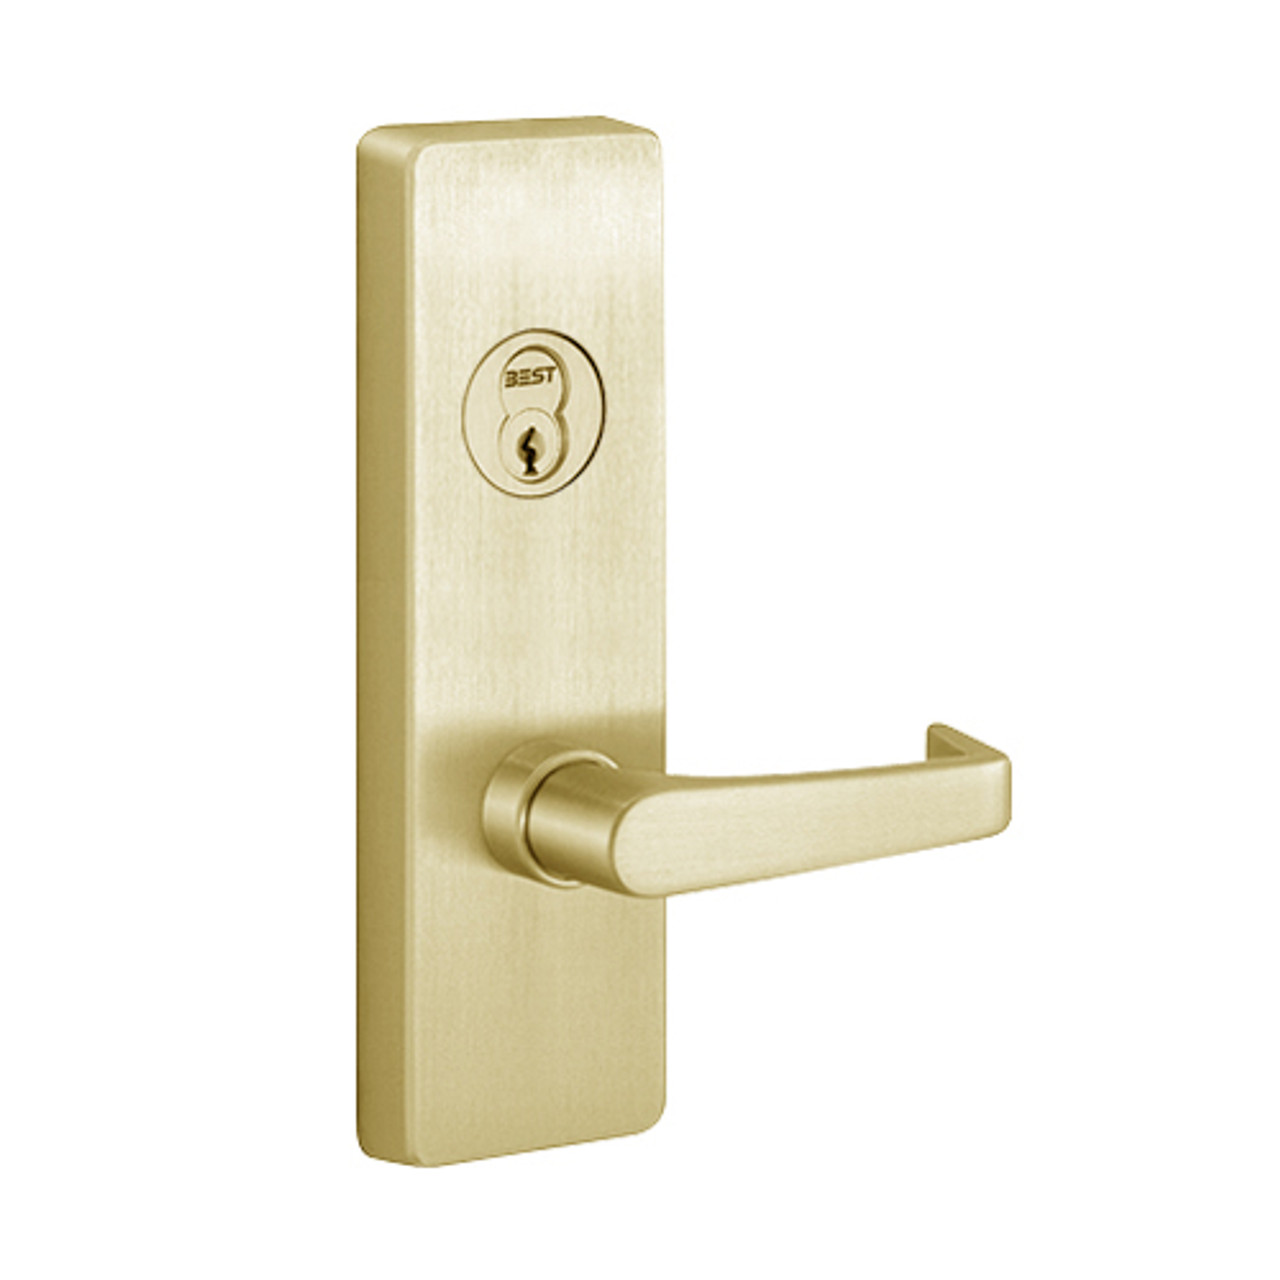 RM4914A-605-RHR PHI Lever Retrofit Trim Always Active with A Lever Design for Apex and Olympian Series Exit Device in Bright Brass Finish